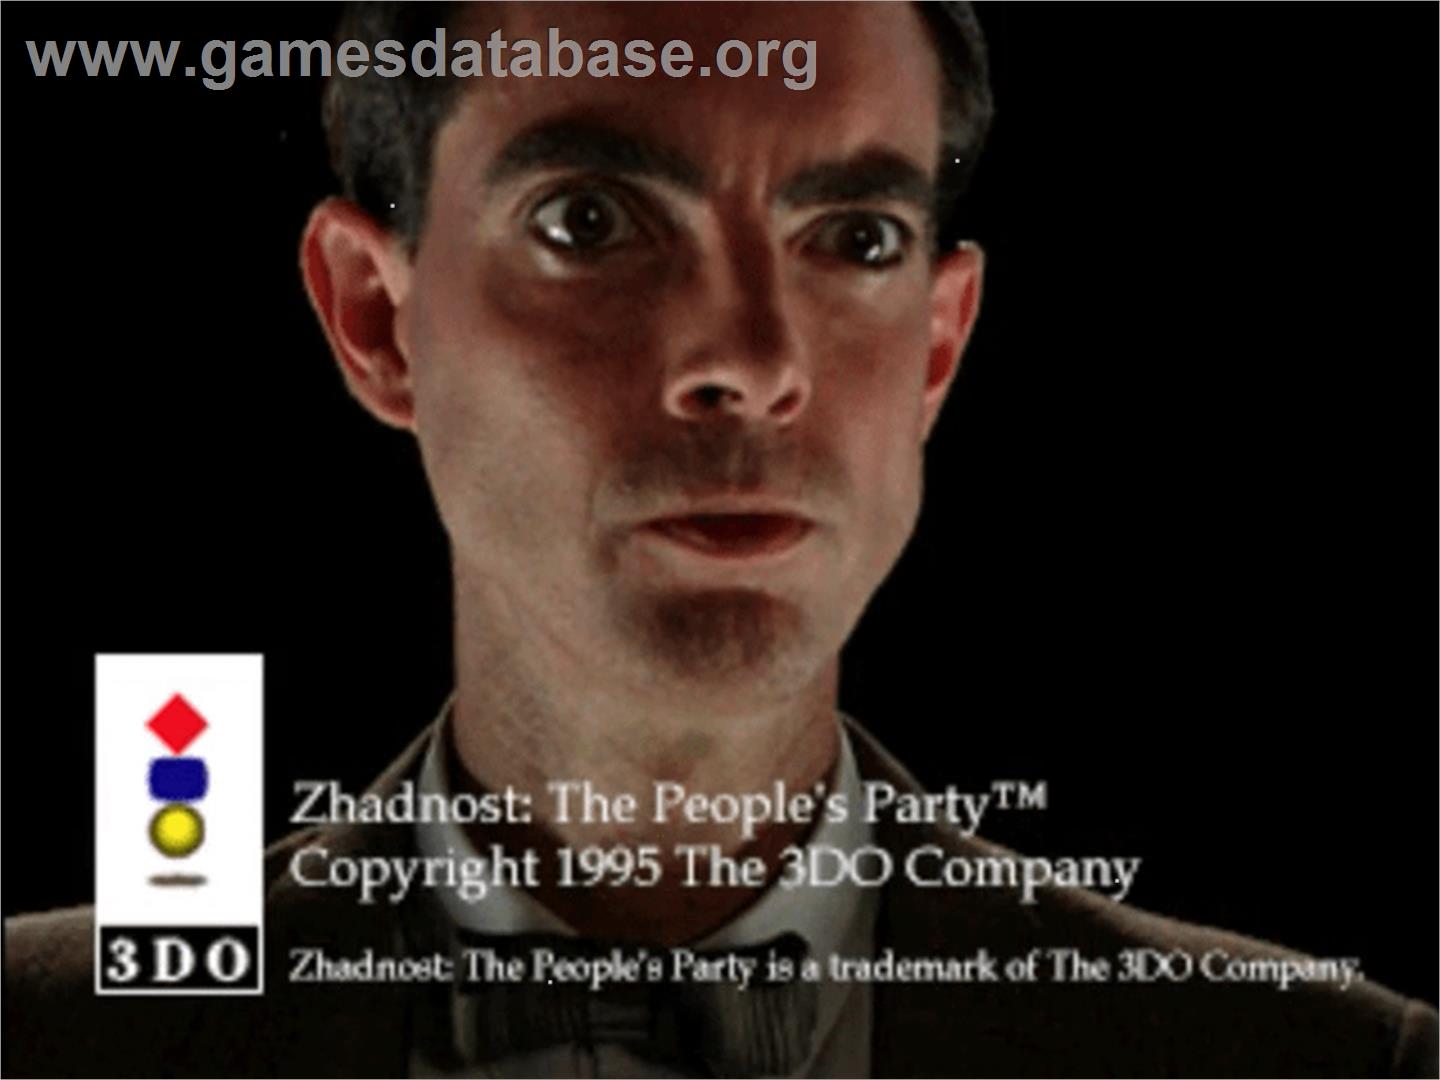 Zhadnost: The People's Party - Panasonic 3DO - Artwork - Title Screen